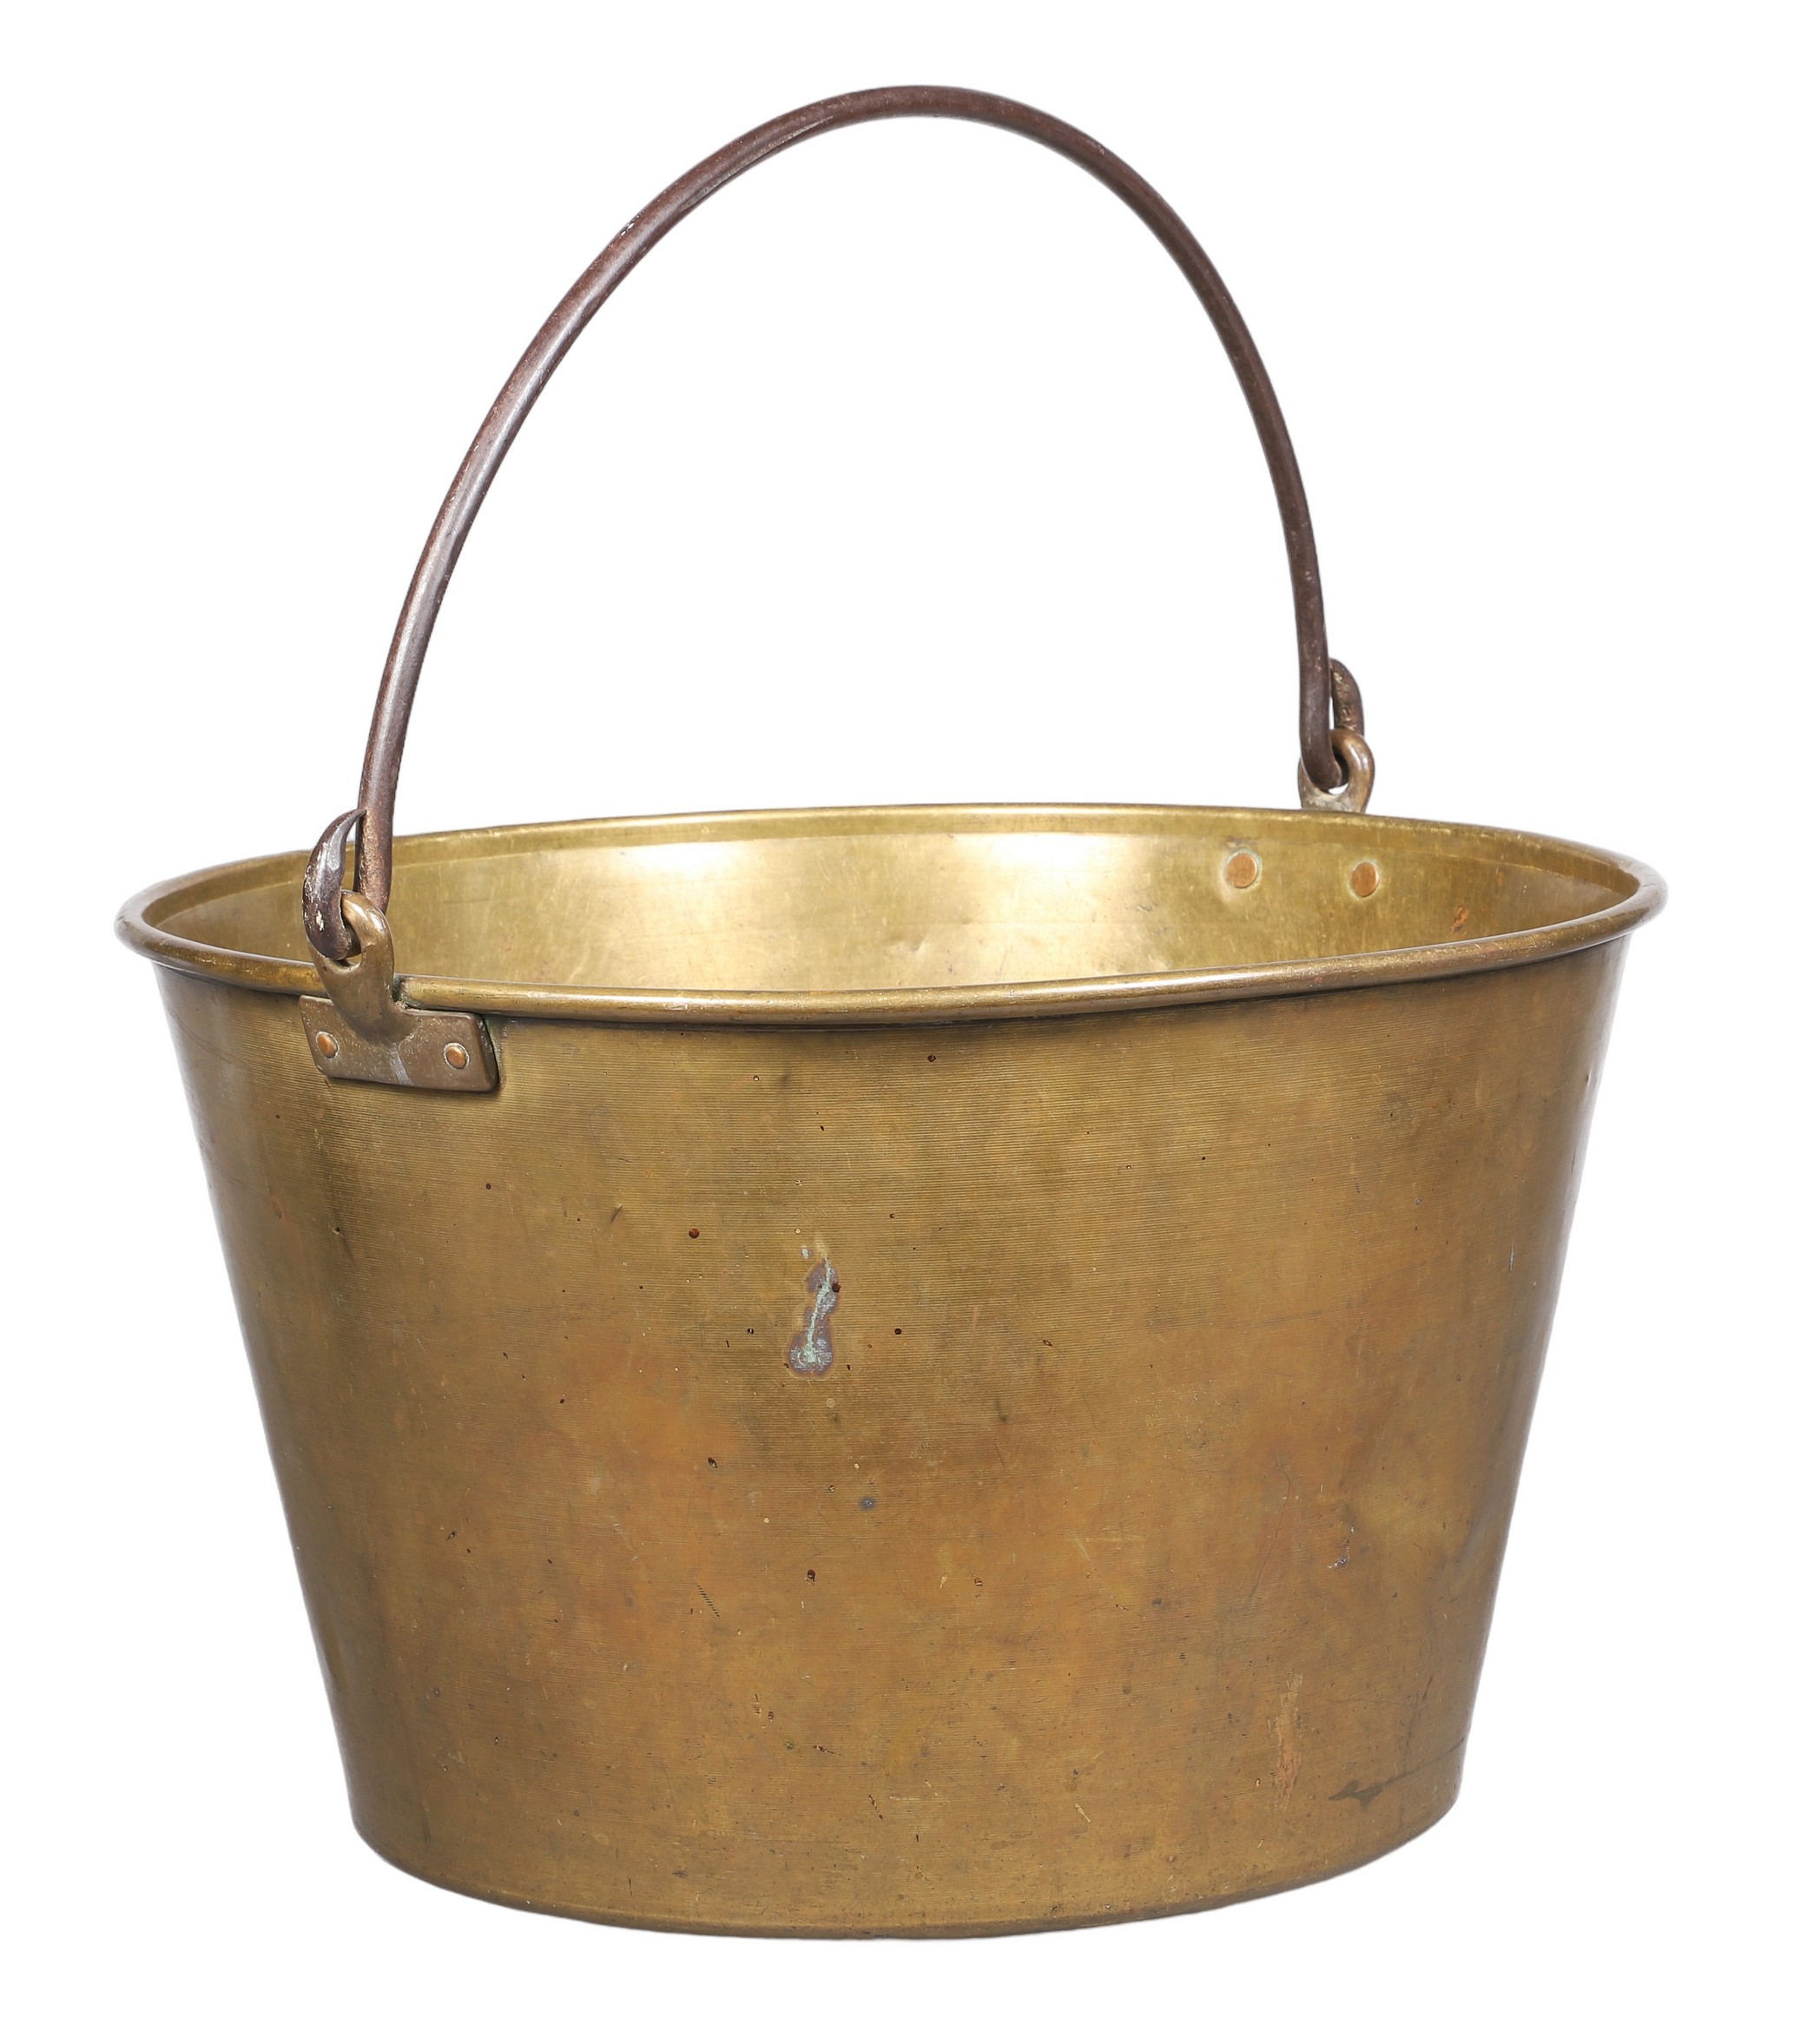 A very large brass kettle with